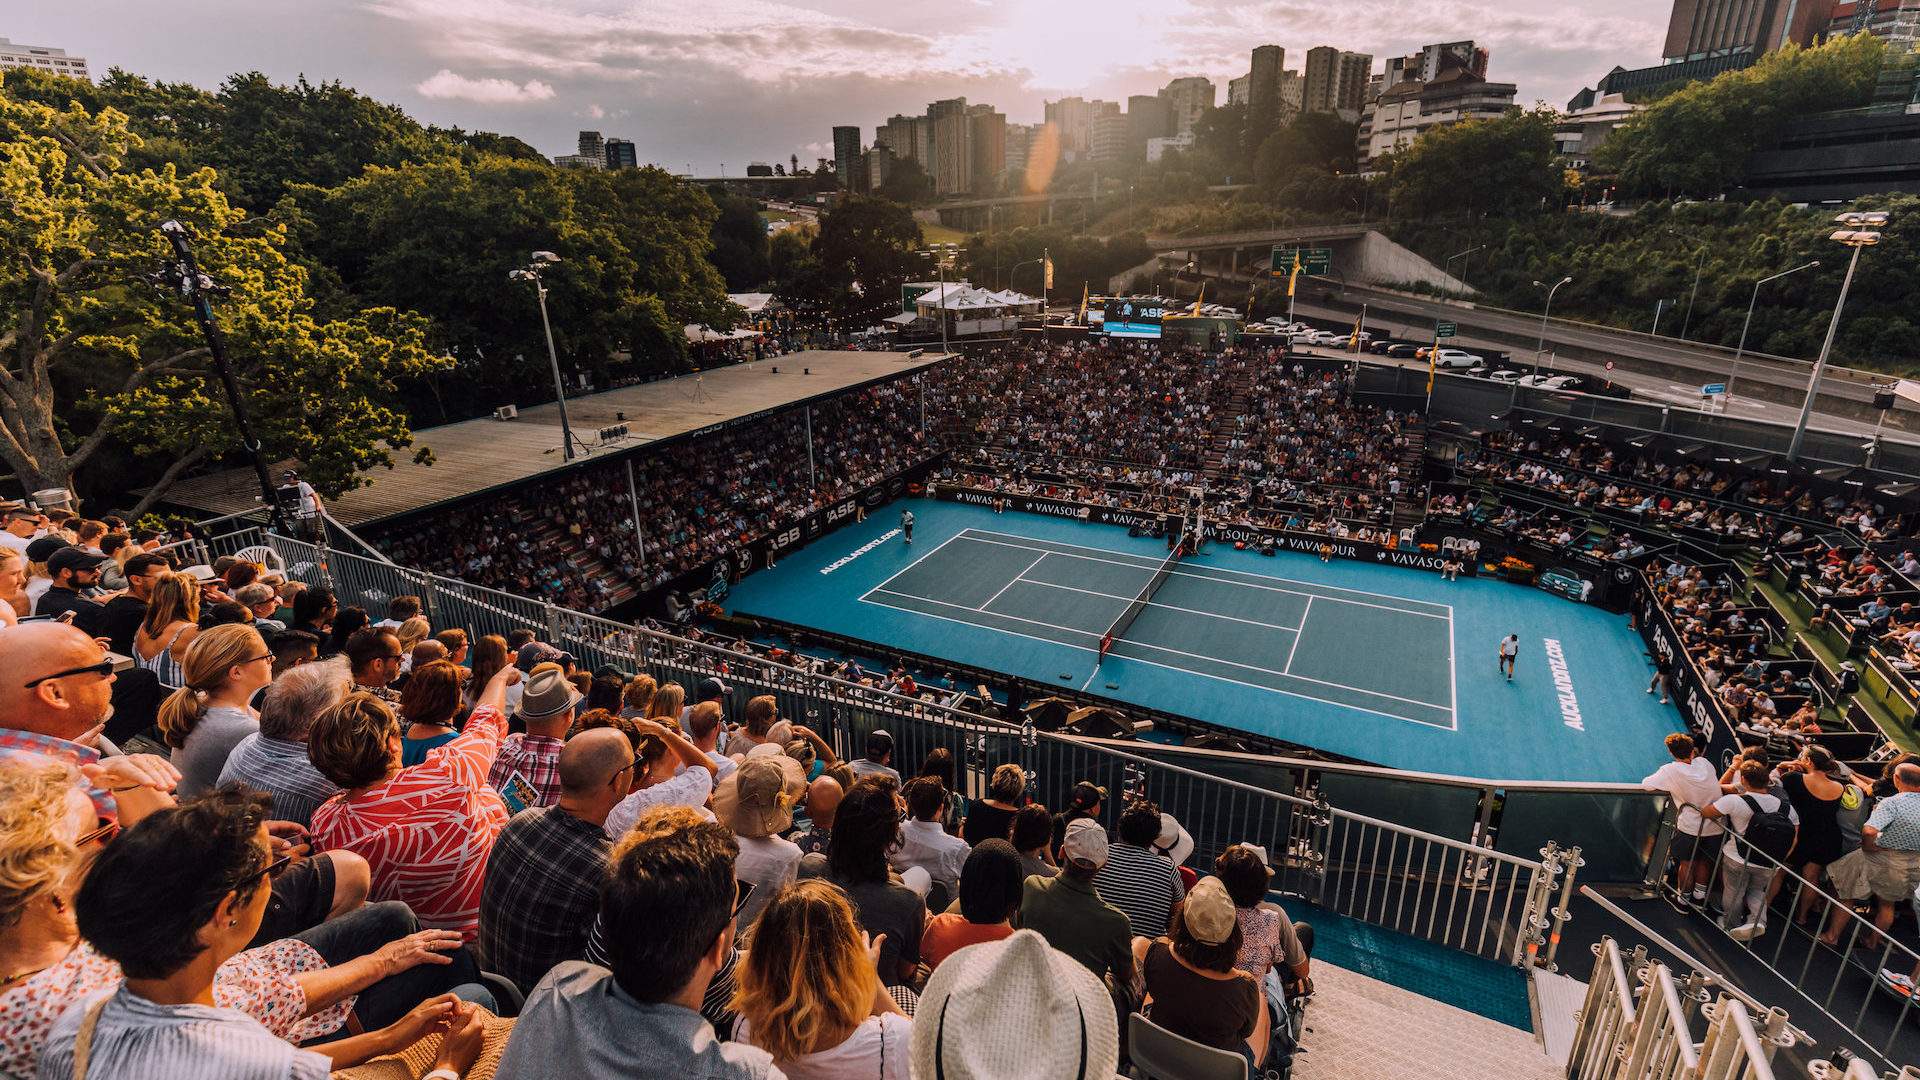 A New Festival Will Take Centre Court at ASB Tennis Arena This November